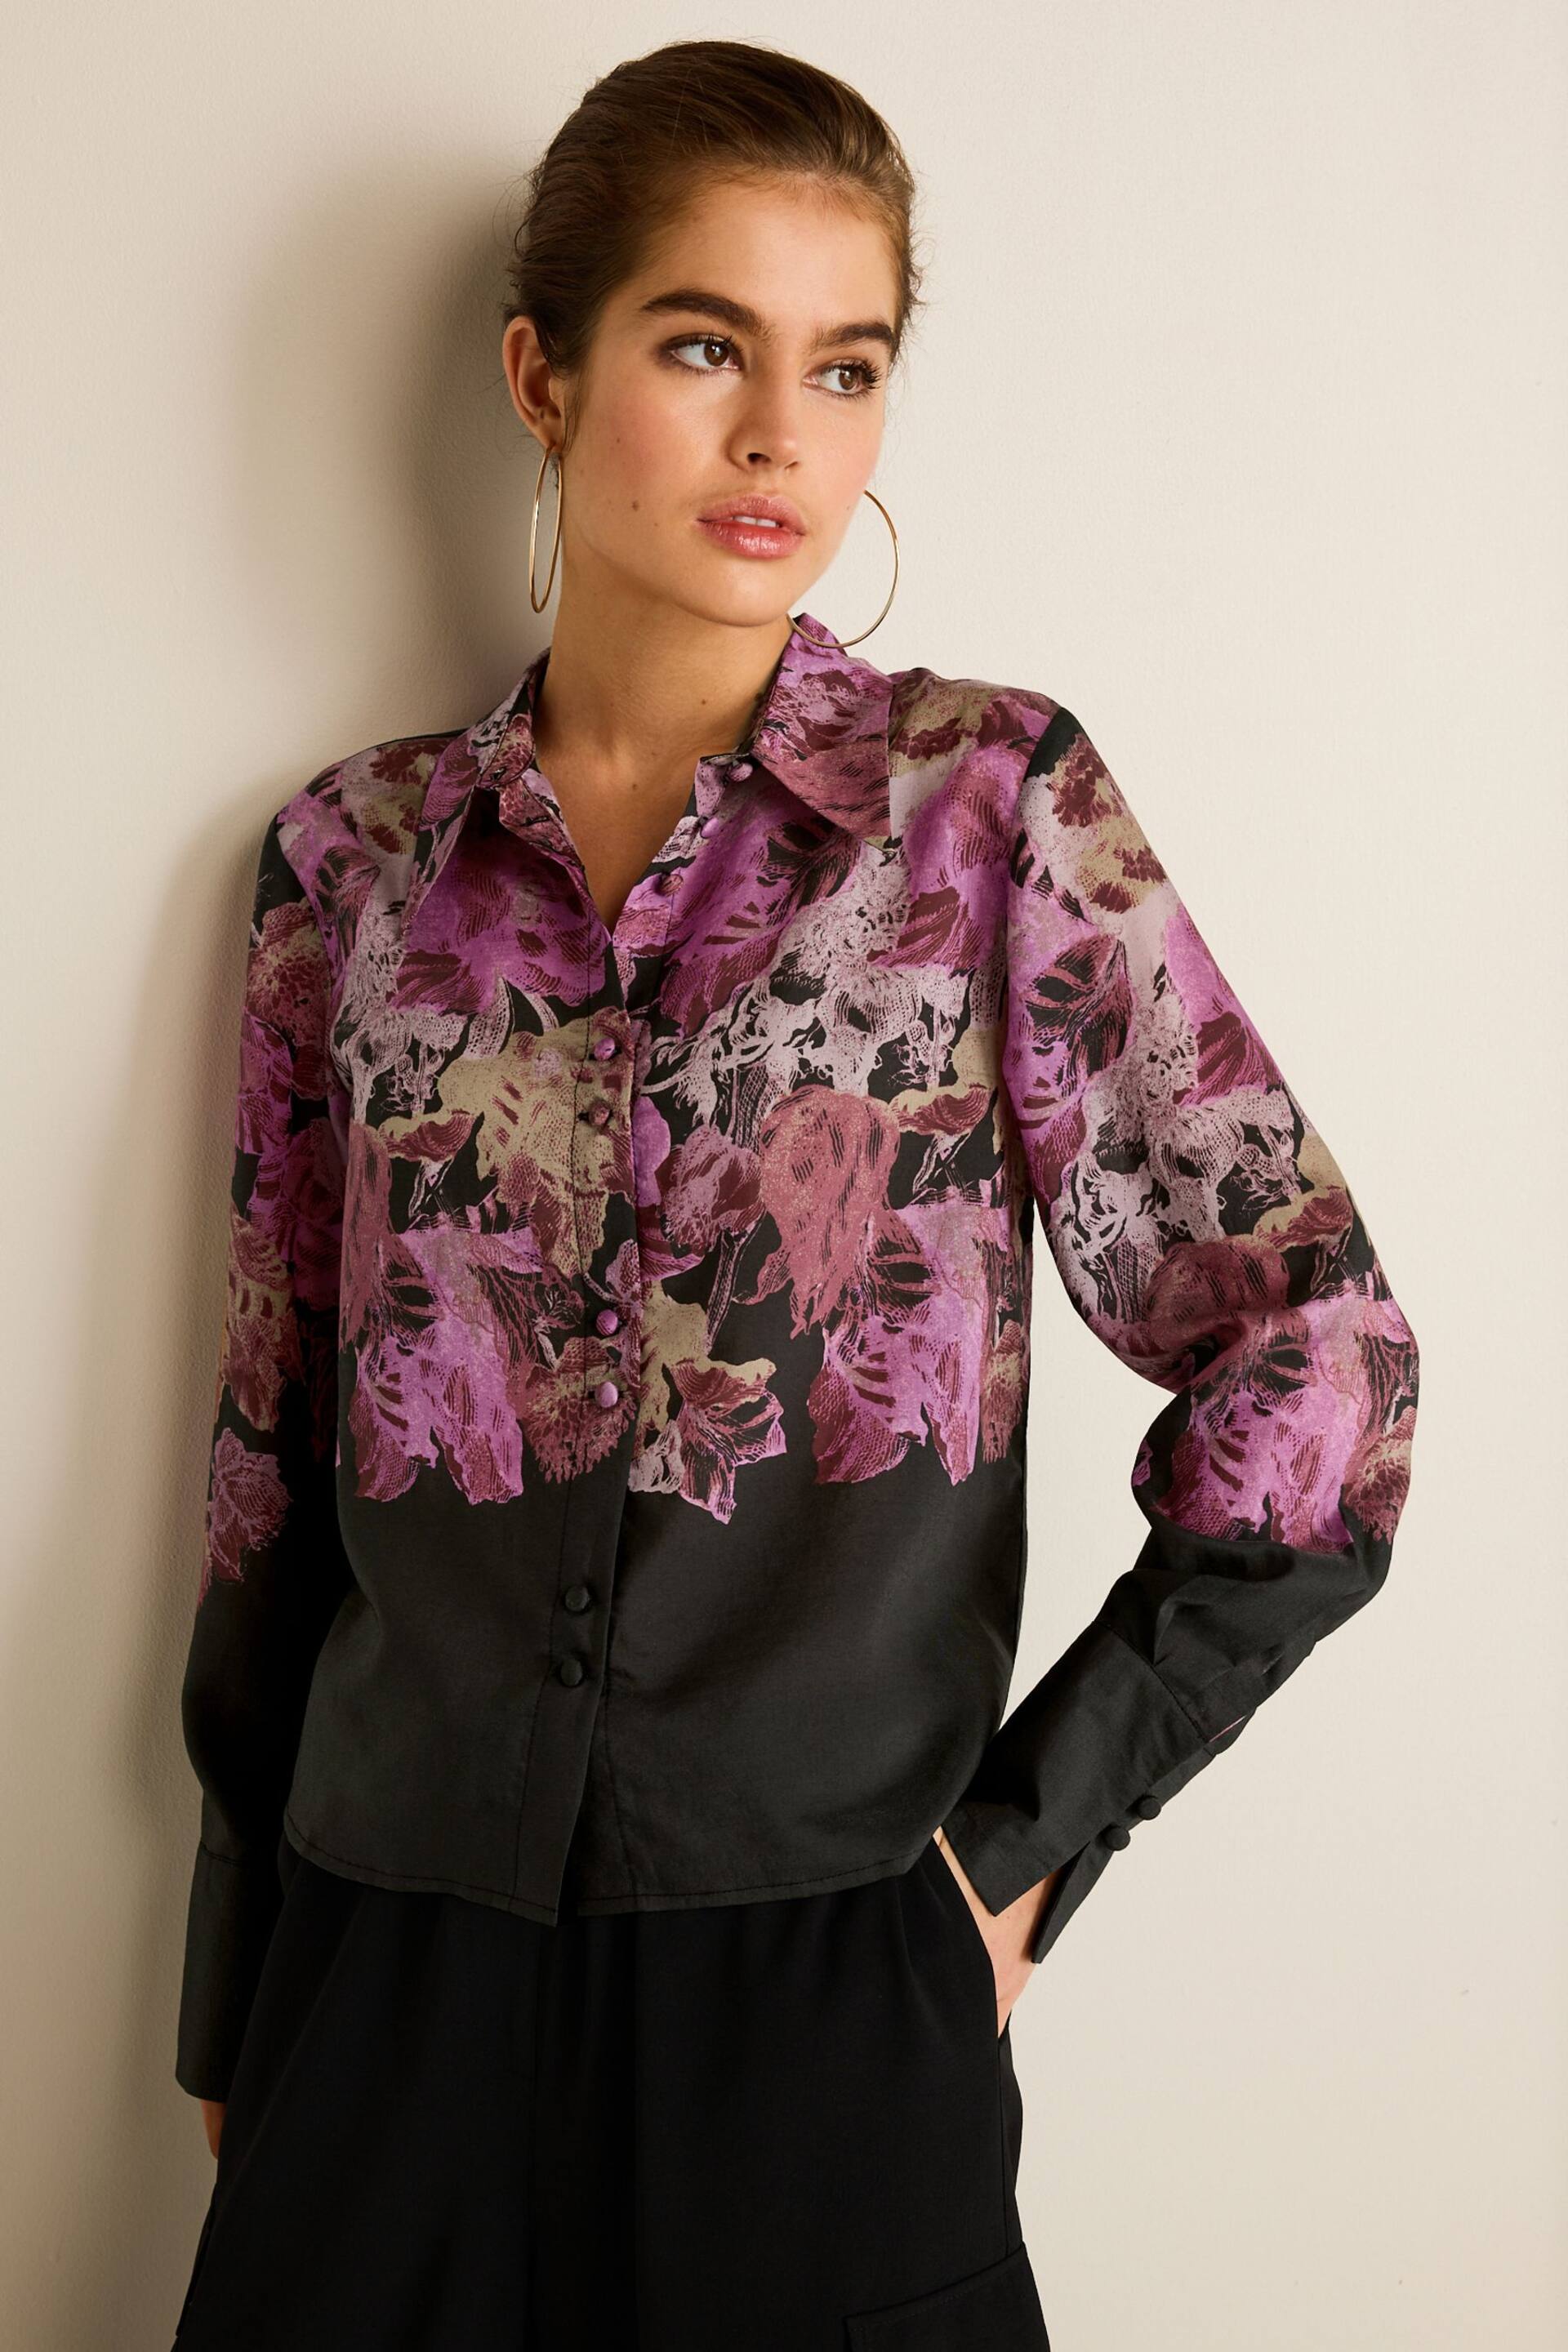 Purple/Black Floral Placement Sheer Placement Print Long Sleeve Shirt - Image 1 of 6